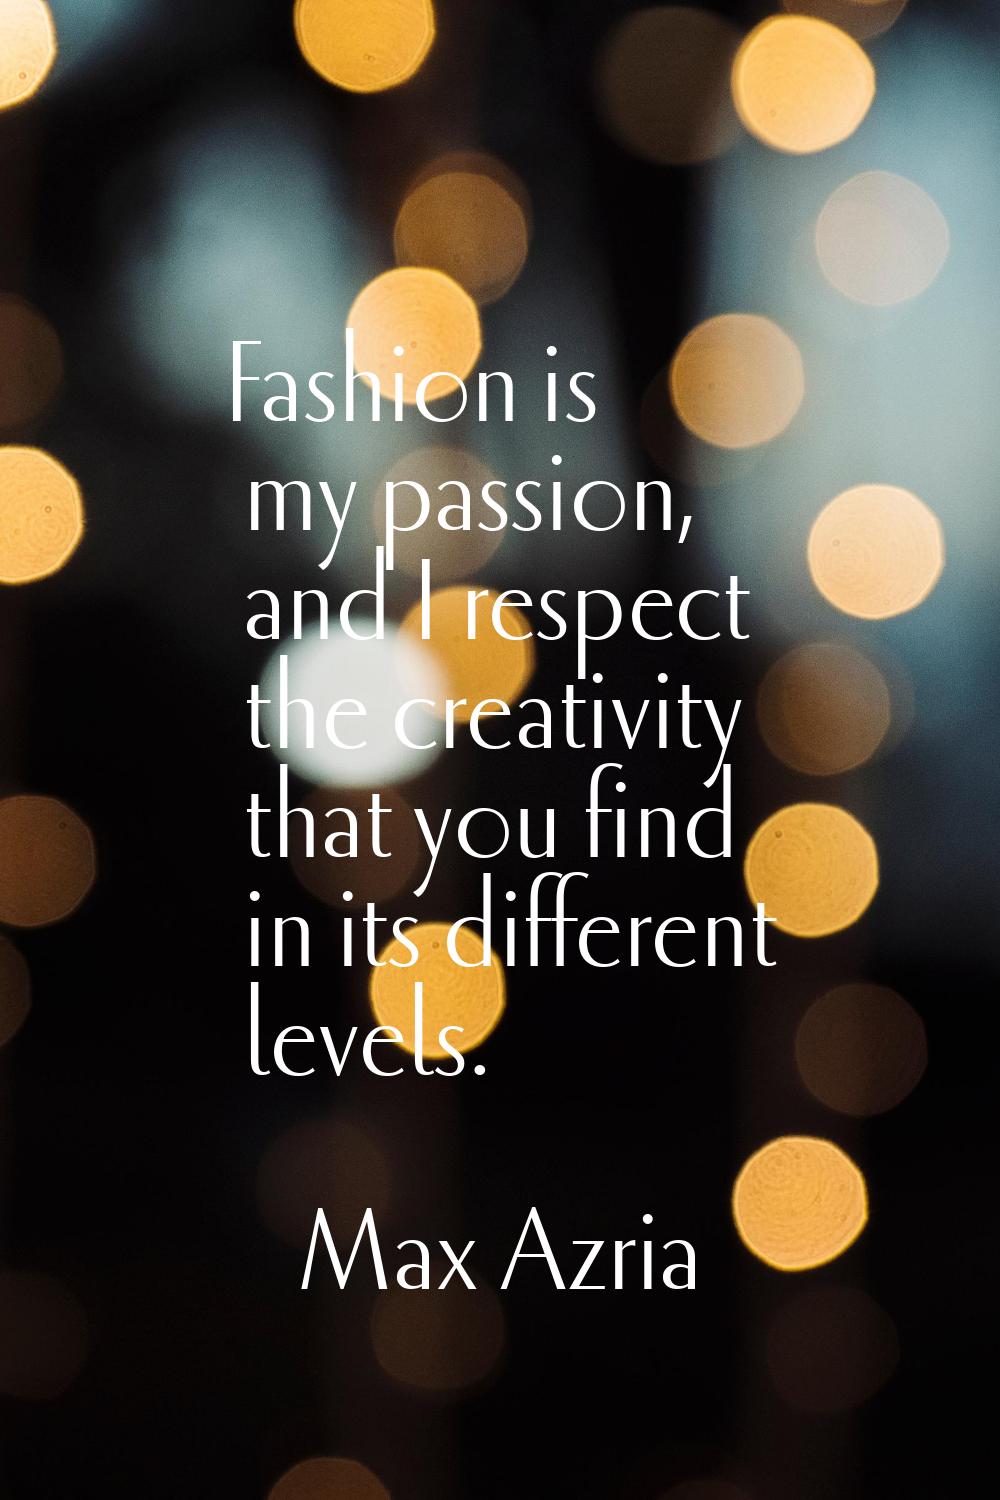 Fashion is my passion, and I respect the creativity that you find in its different levels.